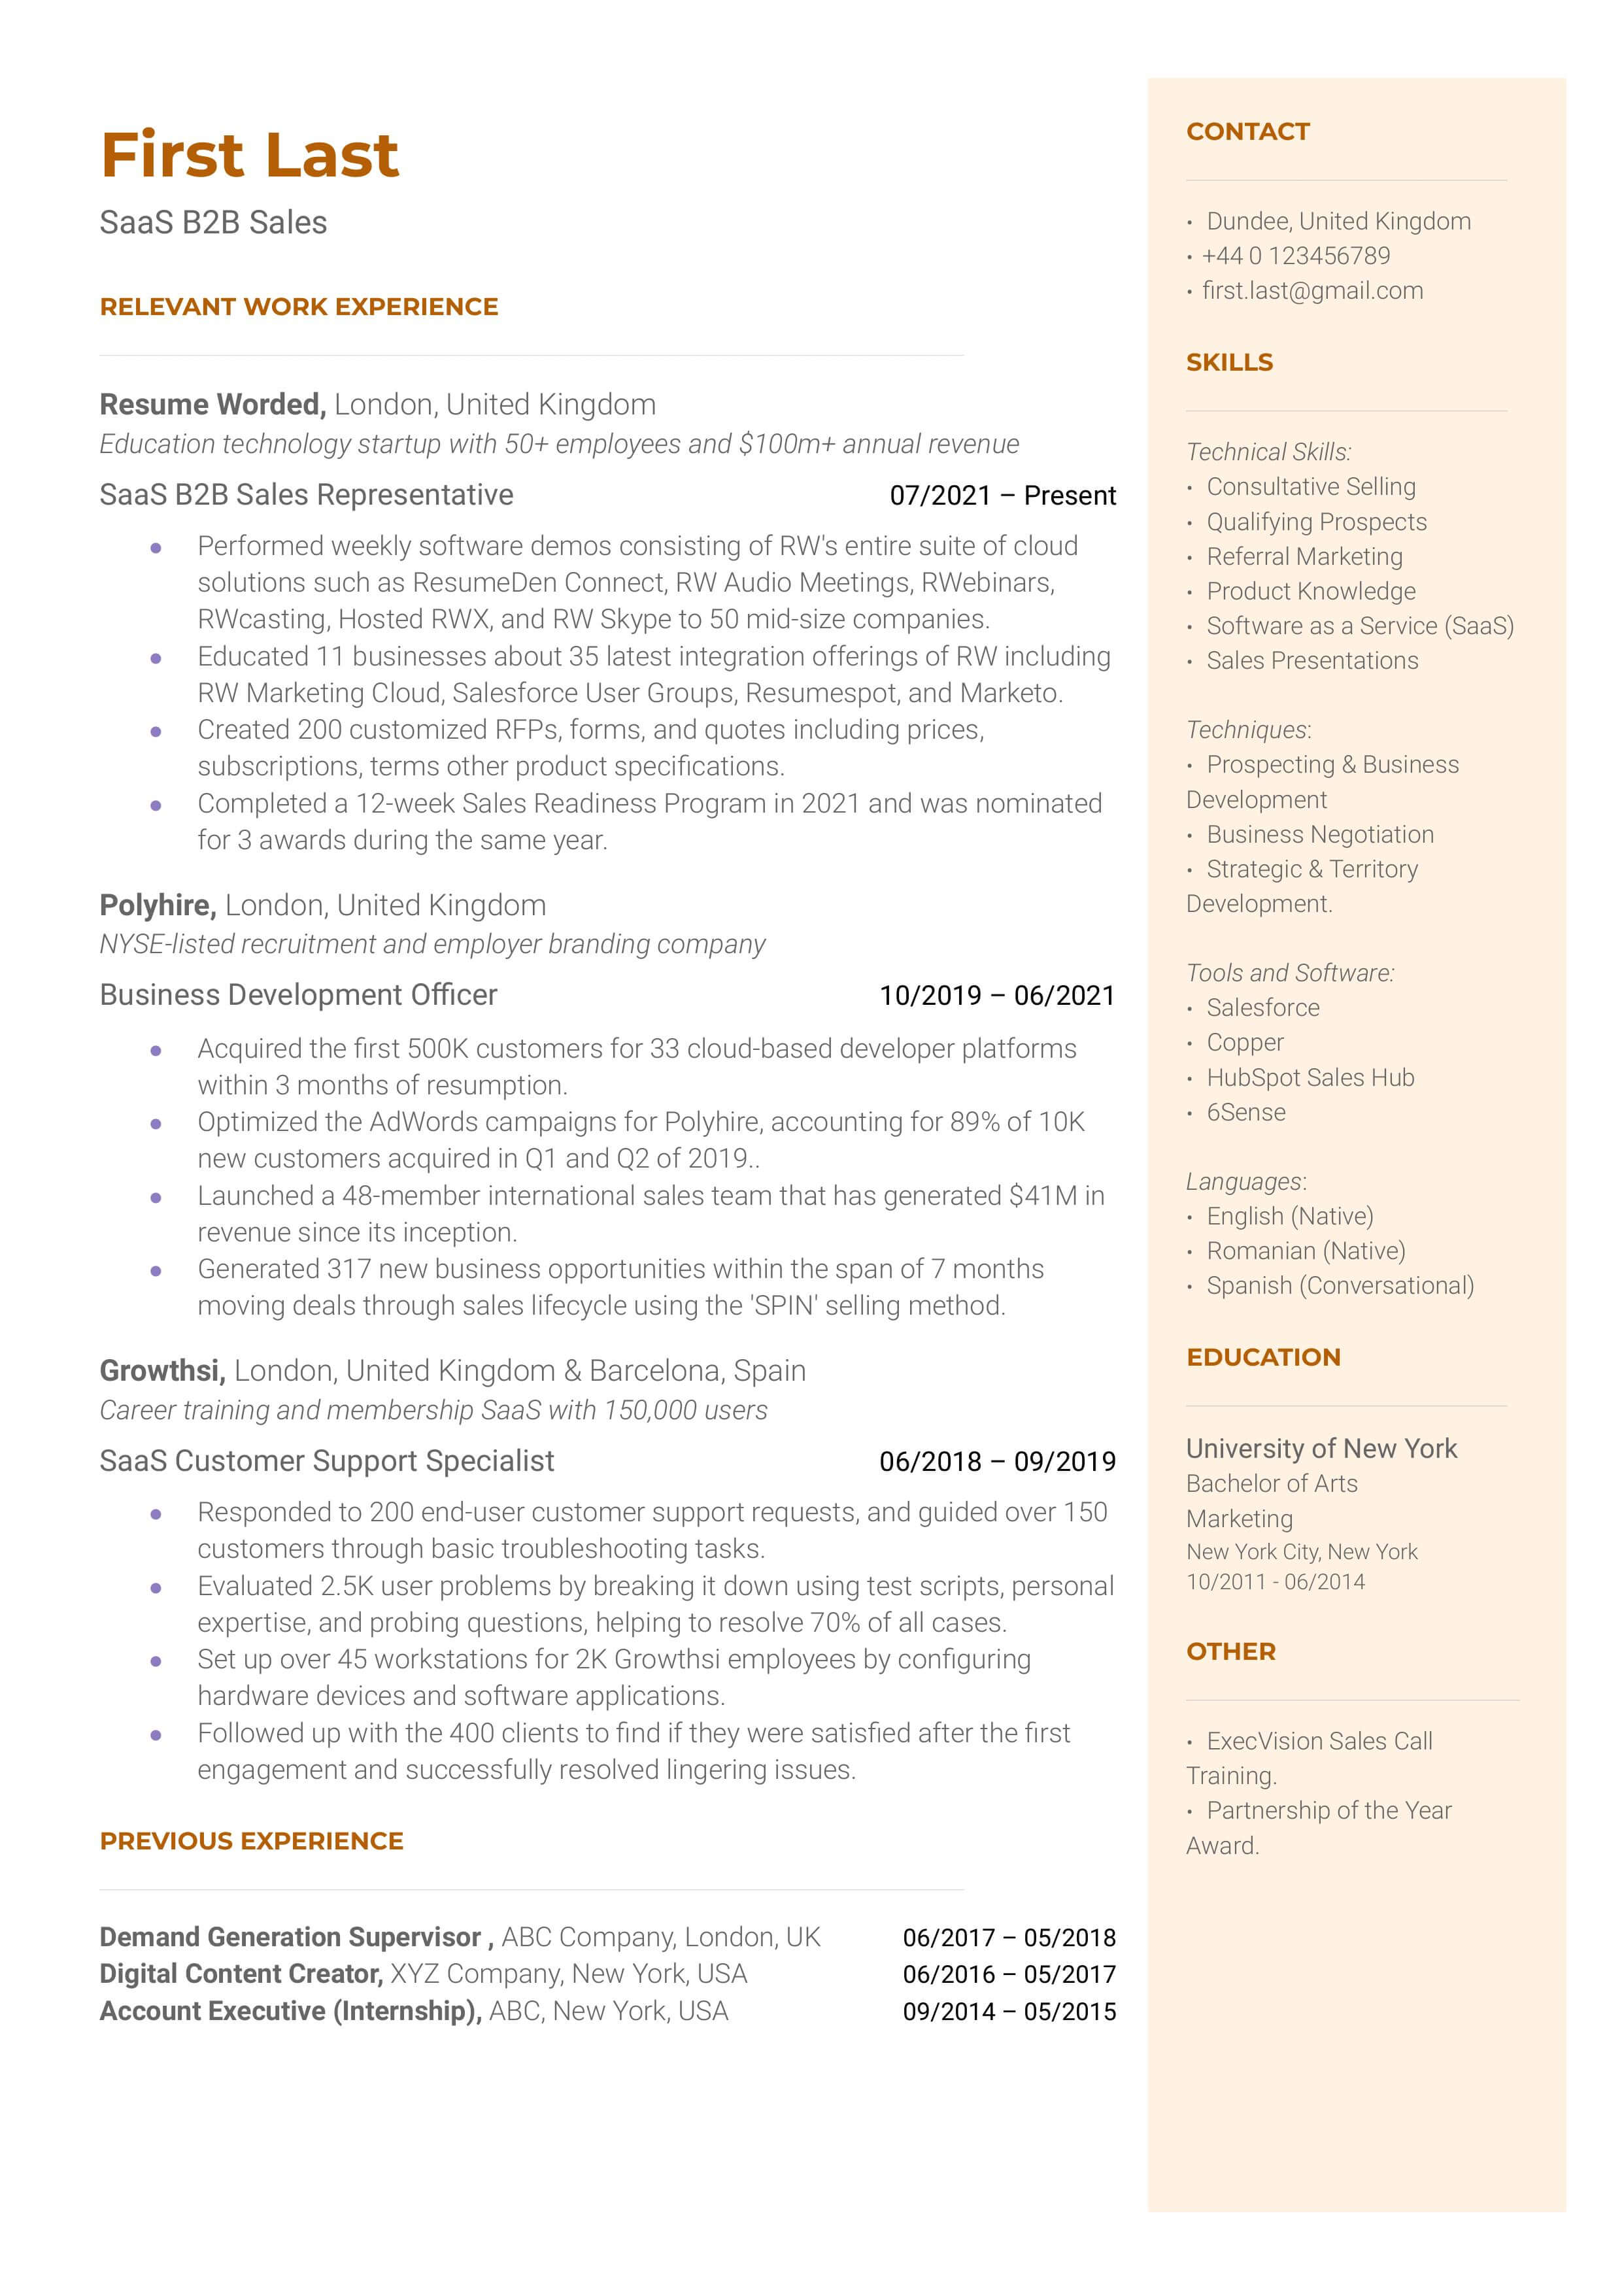 A SaaS B2B Sales resume template that showcases education background, skills, and industry experience